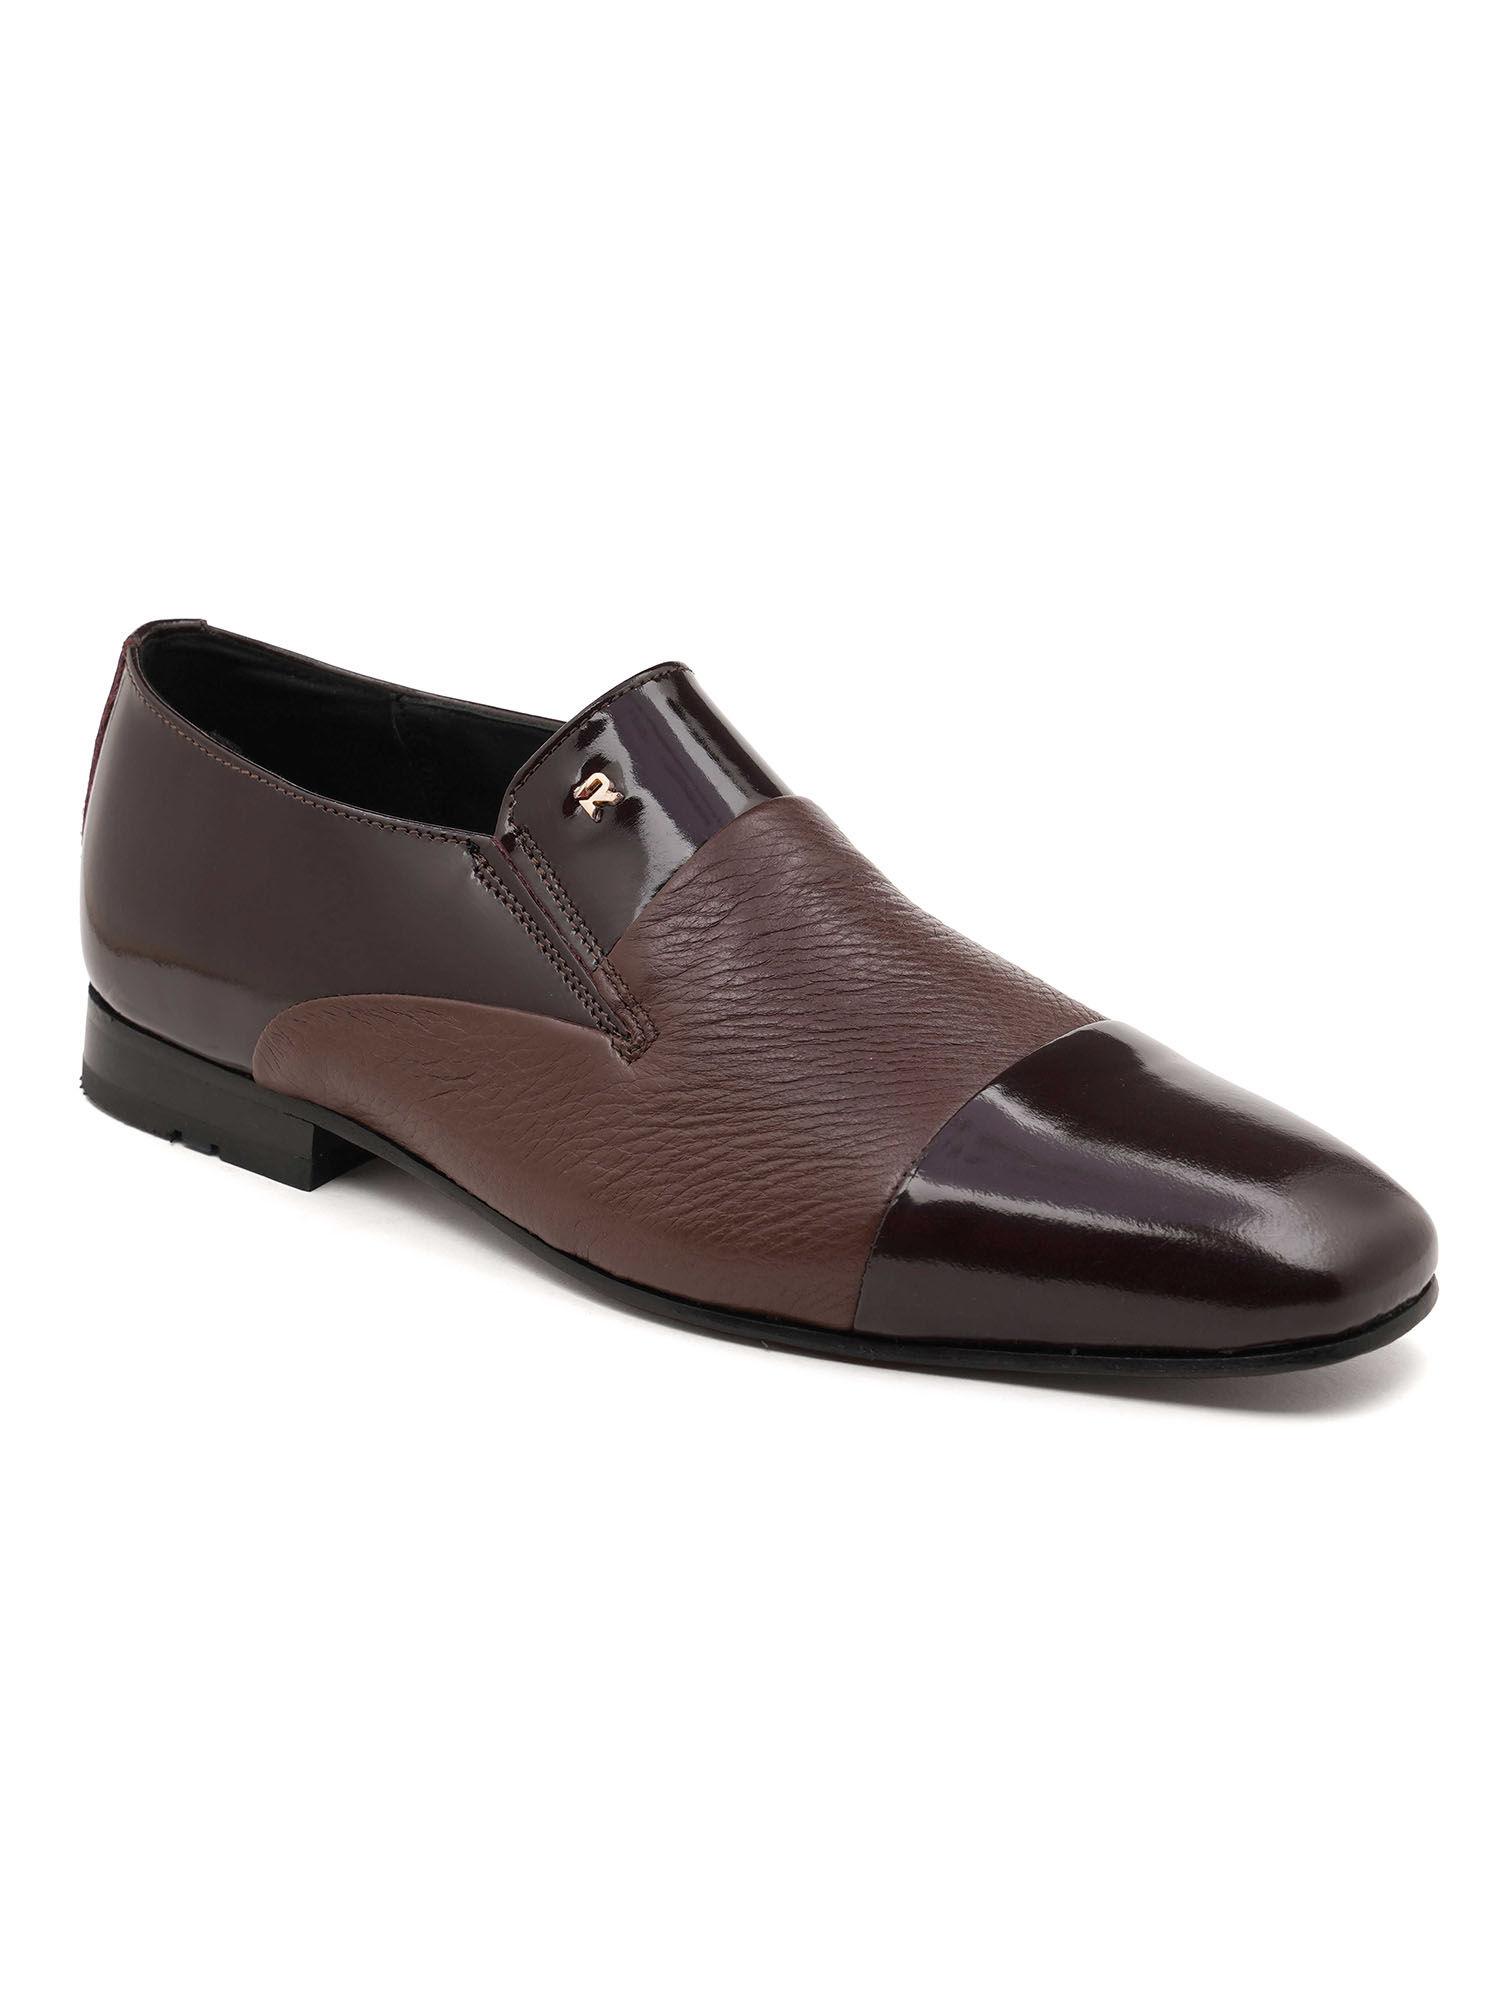 burgundy occasion slip on loafers